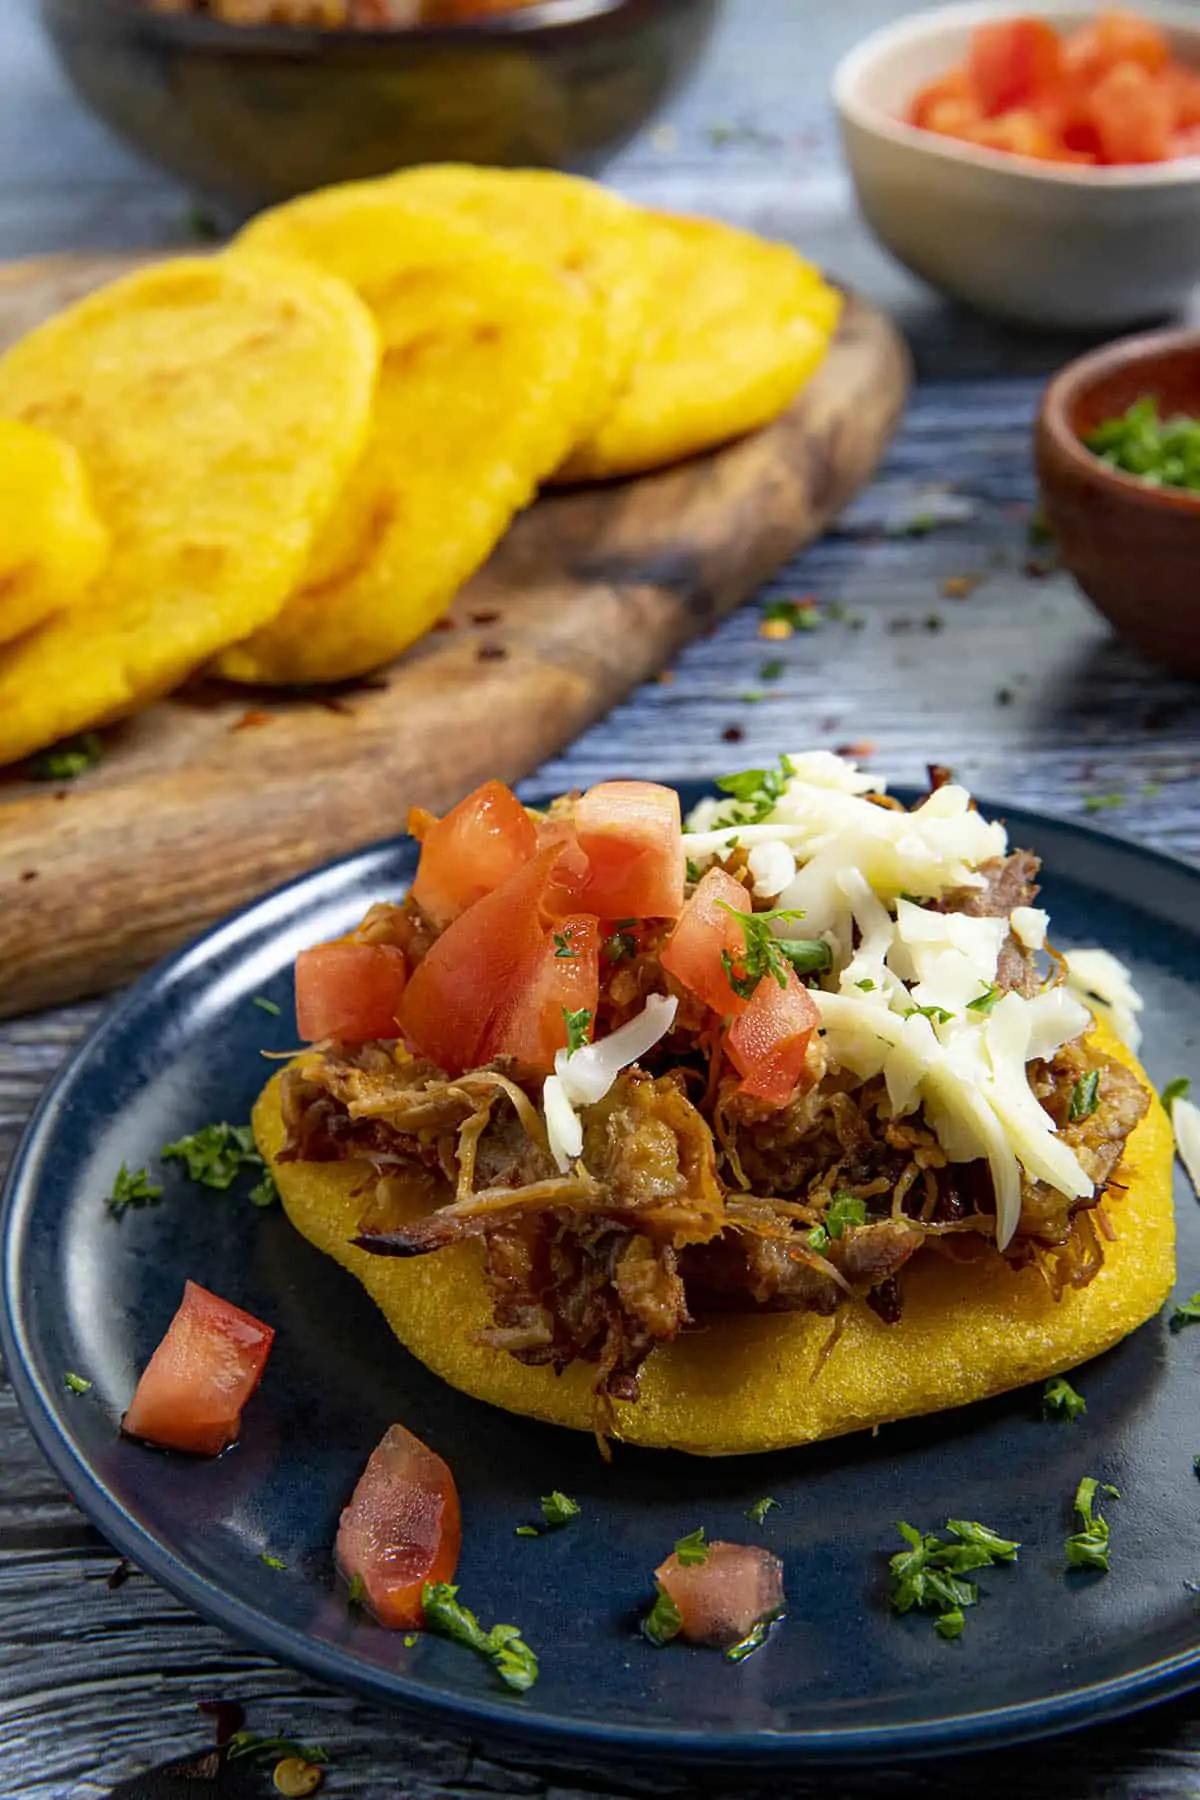 An arepa topped with pulled pork, shredded cheese and tomatoes